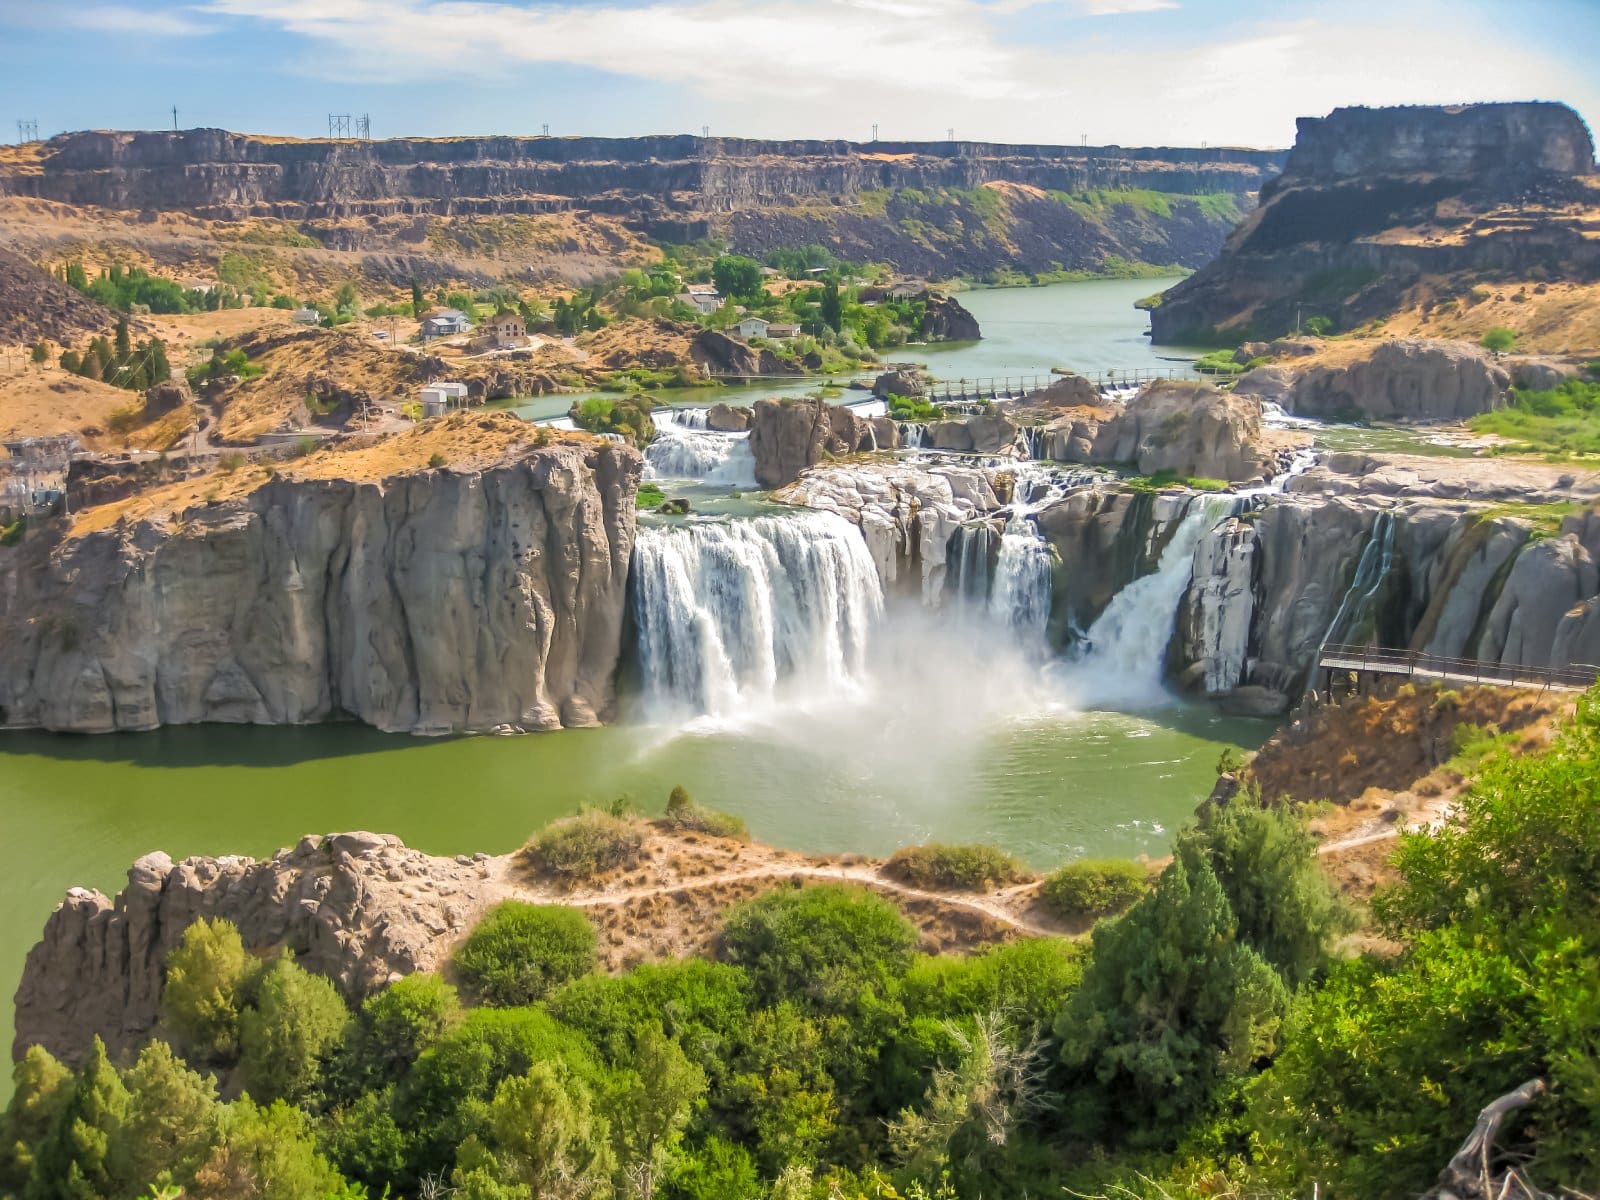 <p class="wp-caption-text">Image Credit: Shutterstock / Benny Marty</p>  <p>Dubbed the “Niagara of the West,” these falls offer a spectacular view for just a few dollars’ park entry. It’s nature’s majesty on a budget, with picnic areas for a low-cost day out.</p>